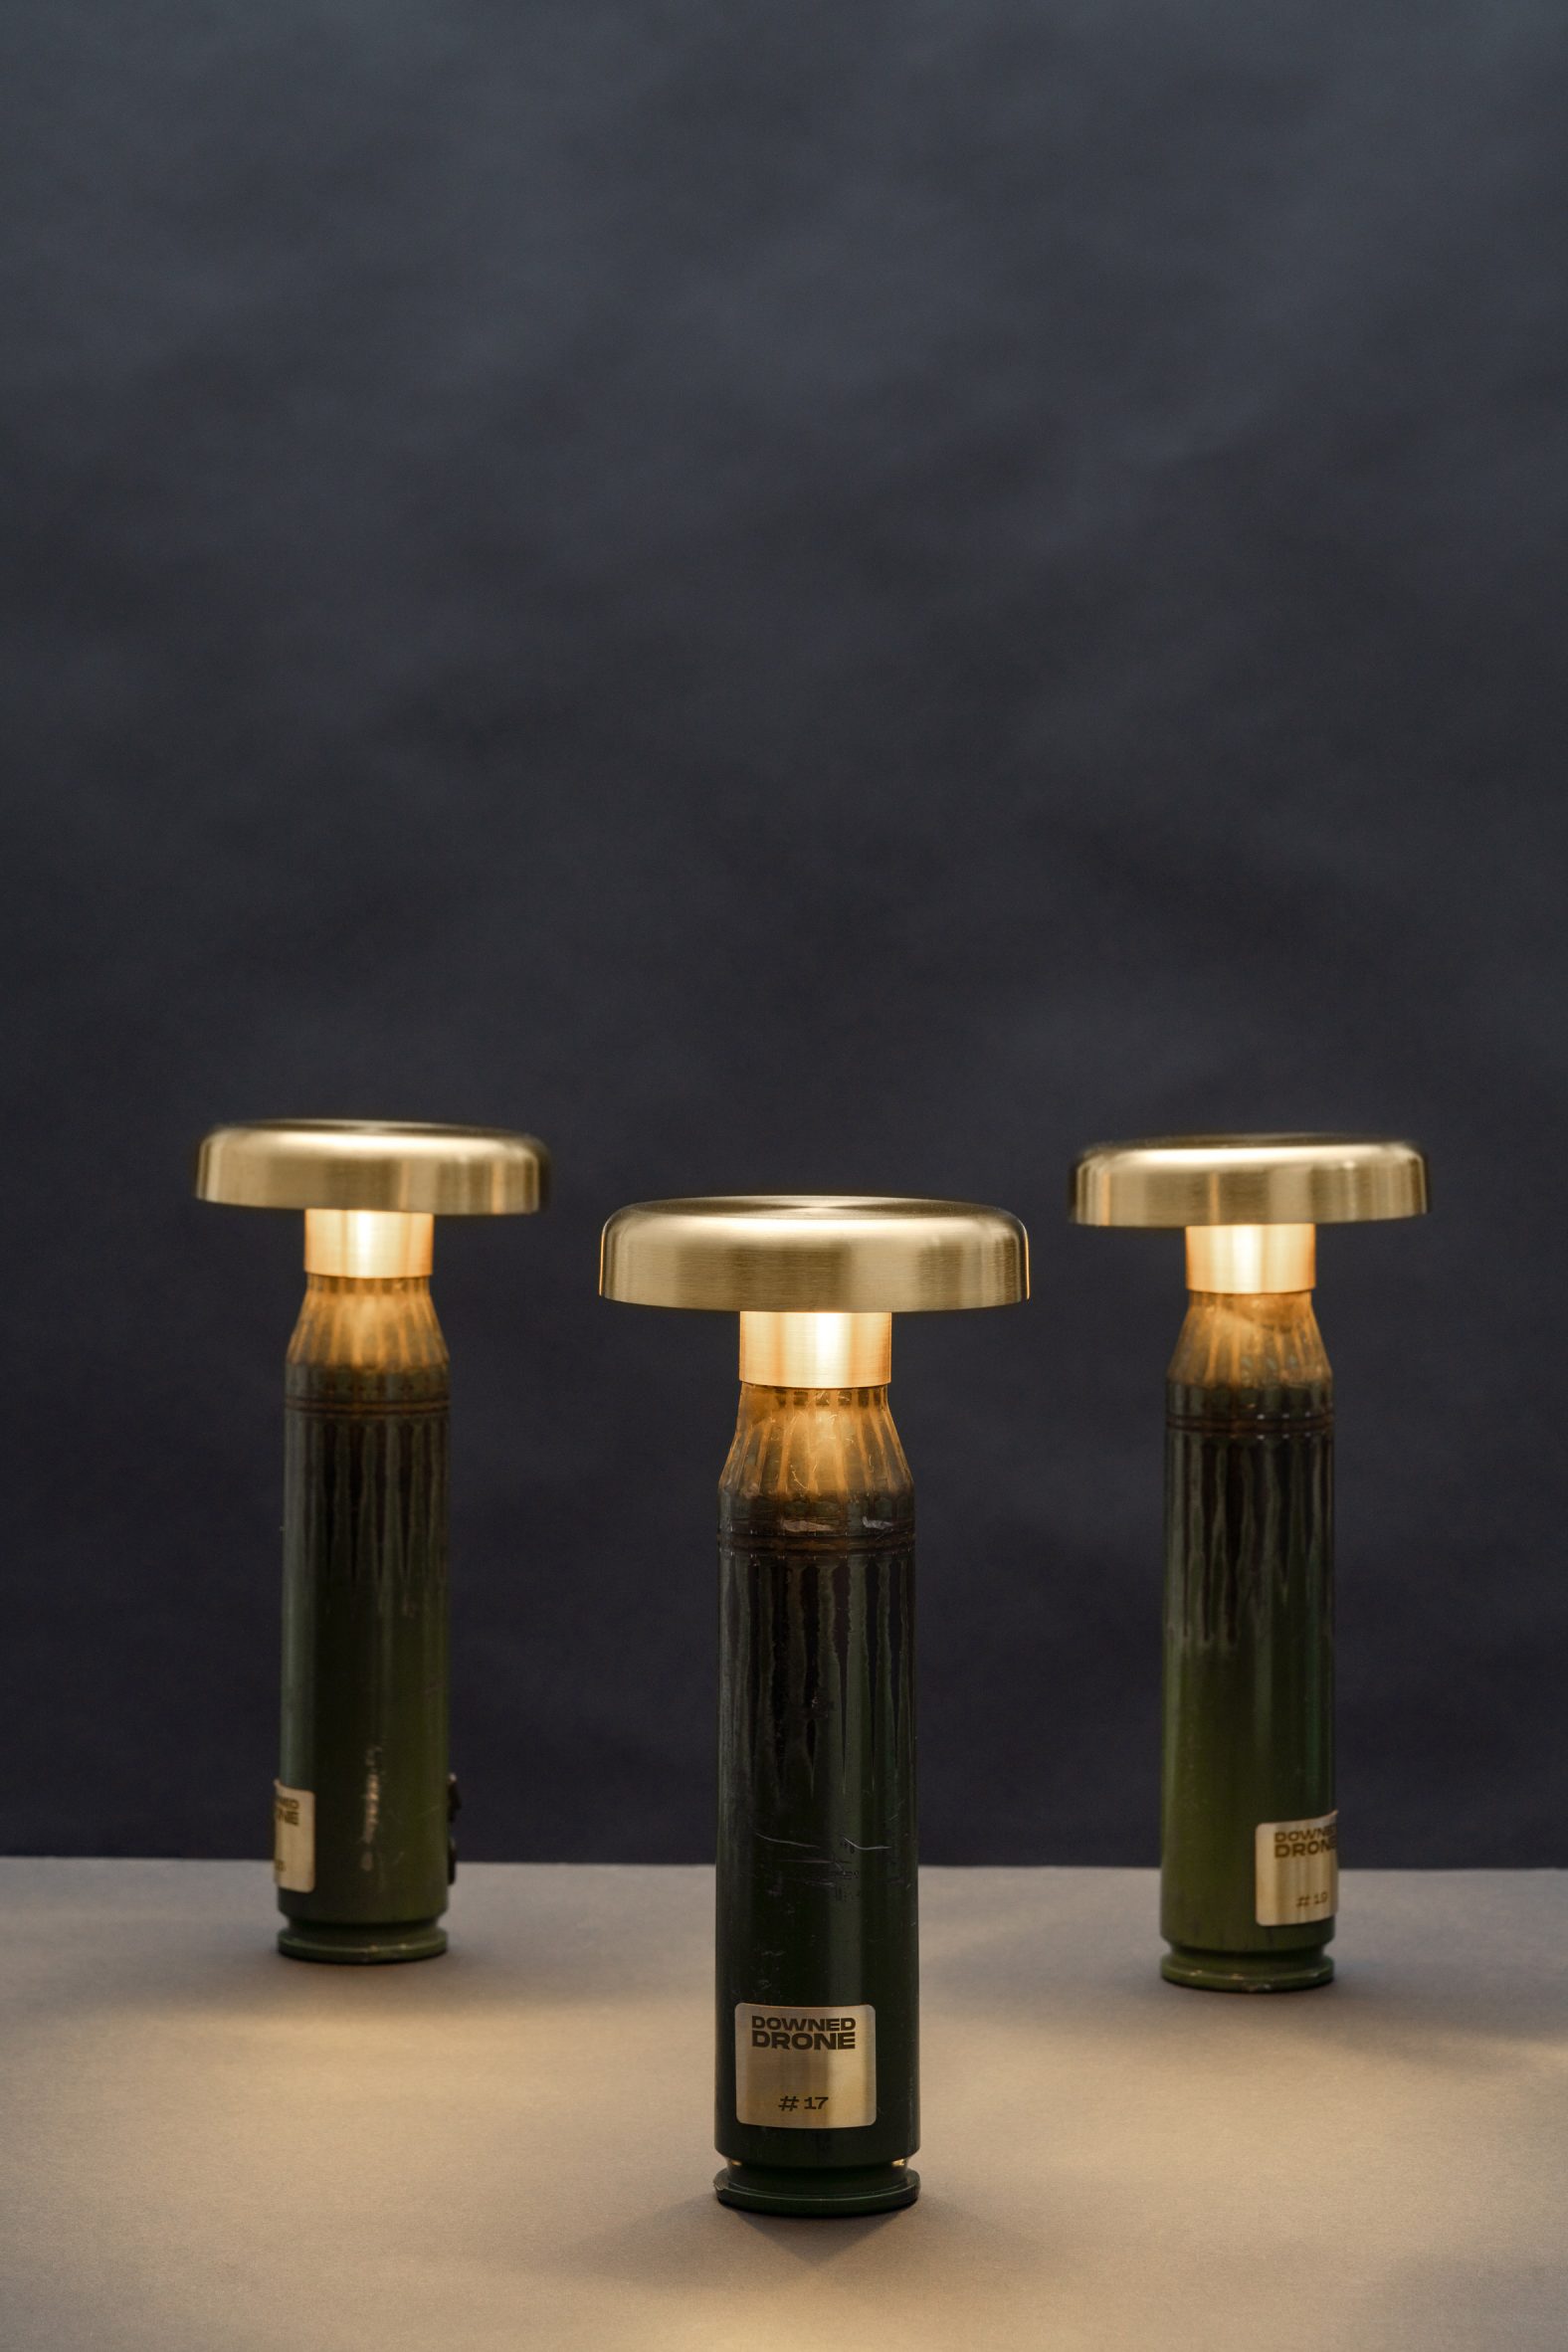 Green lamps made from shell casings